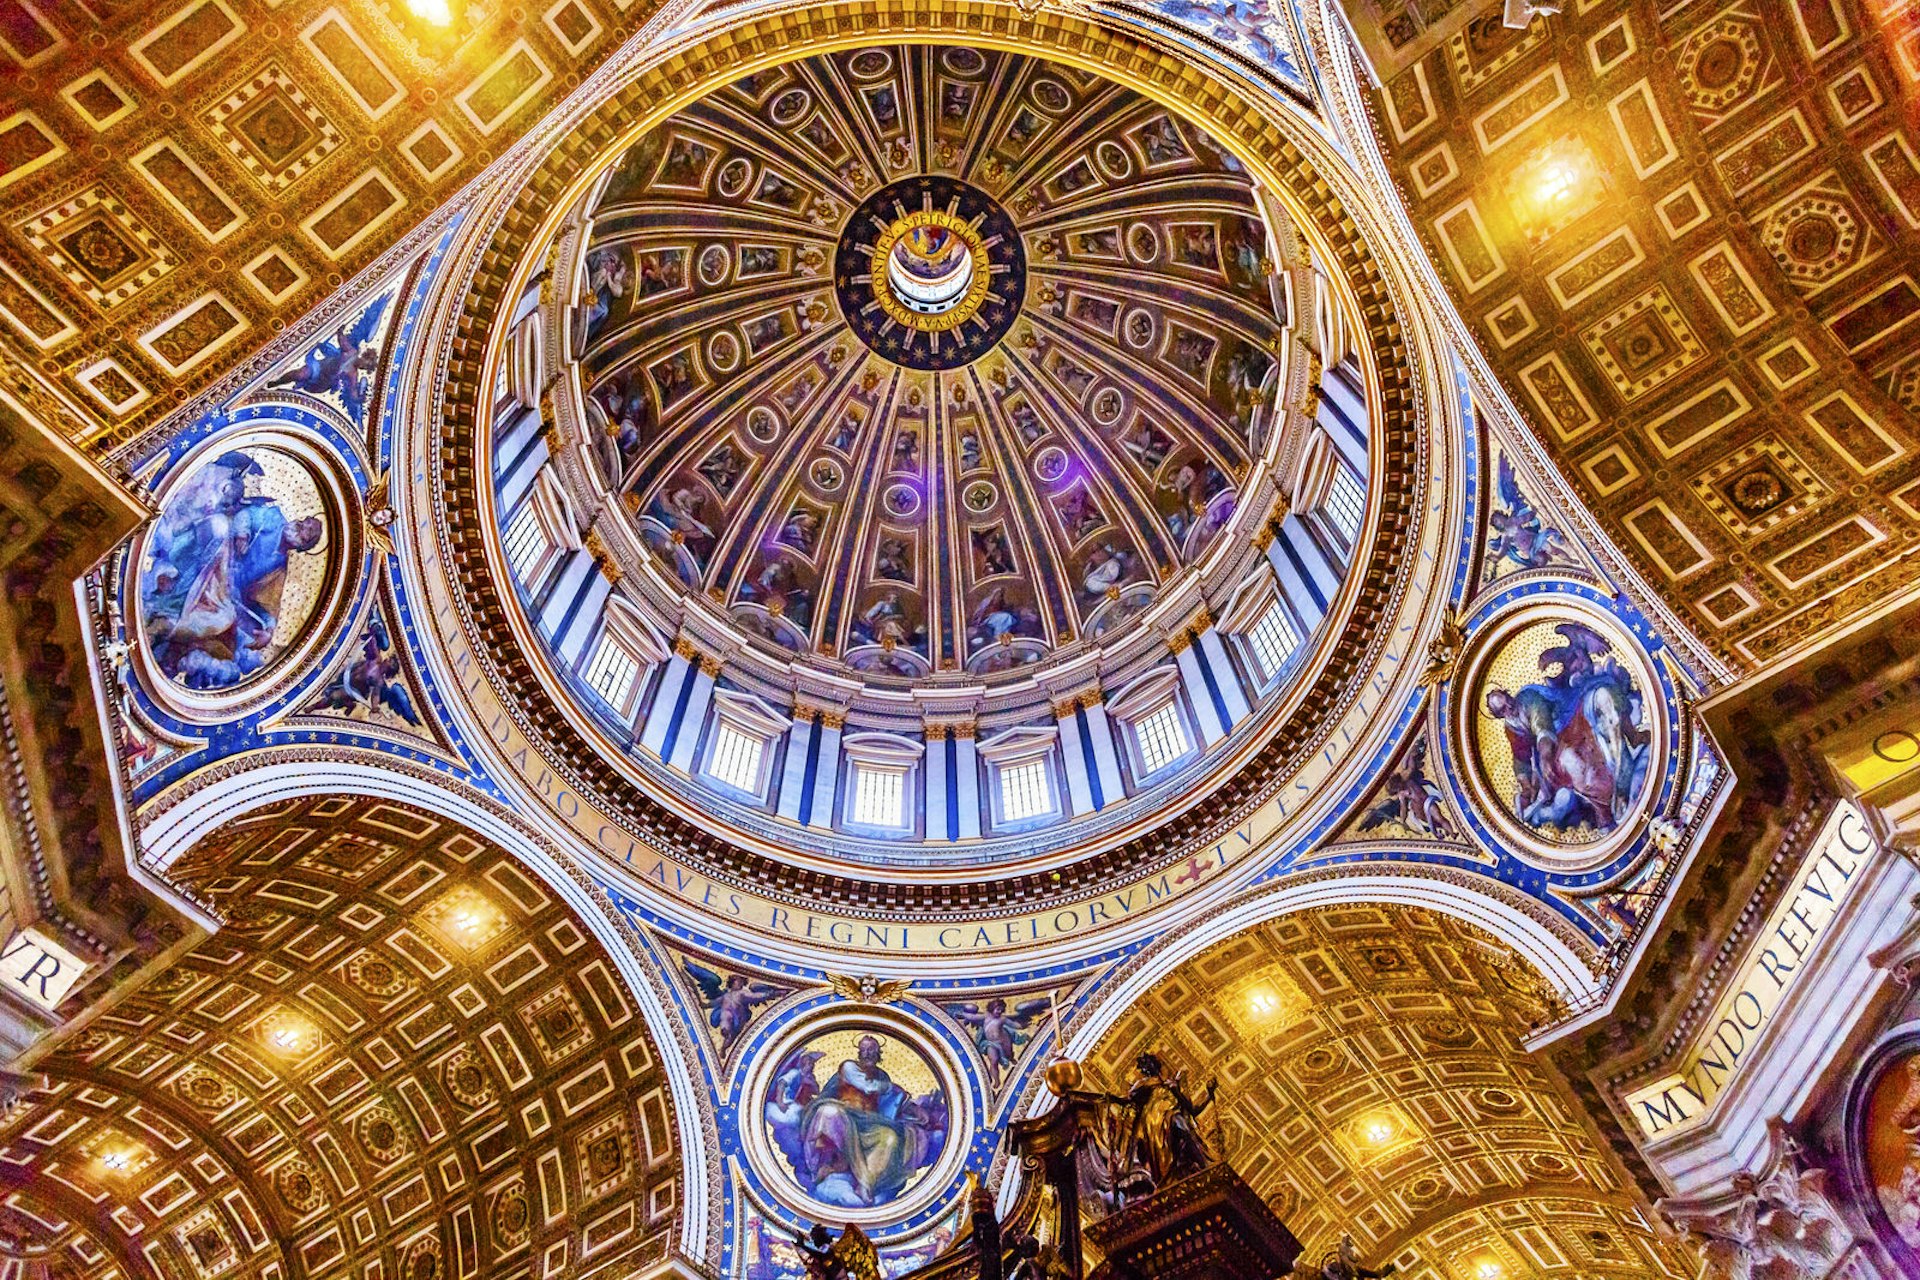 Looking upwards, the image shows a huge circular dome surrounded by windows; large semi-circular vaulted ceilings glistening in gold gilding branch off from the bottom of the dome in four directions